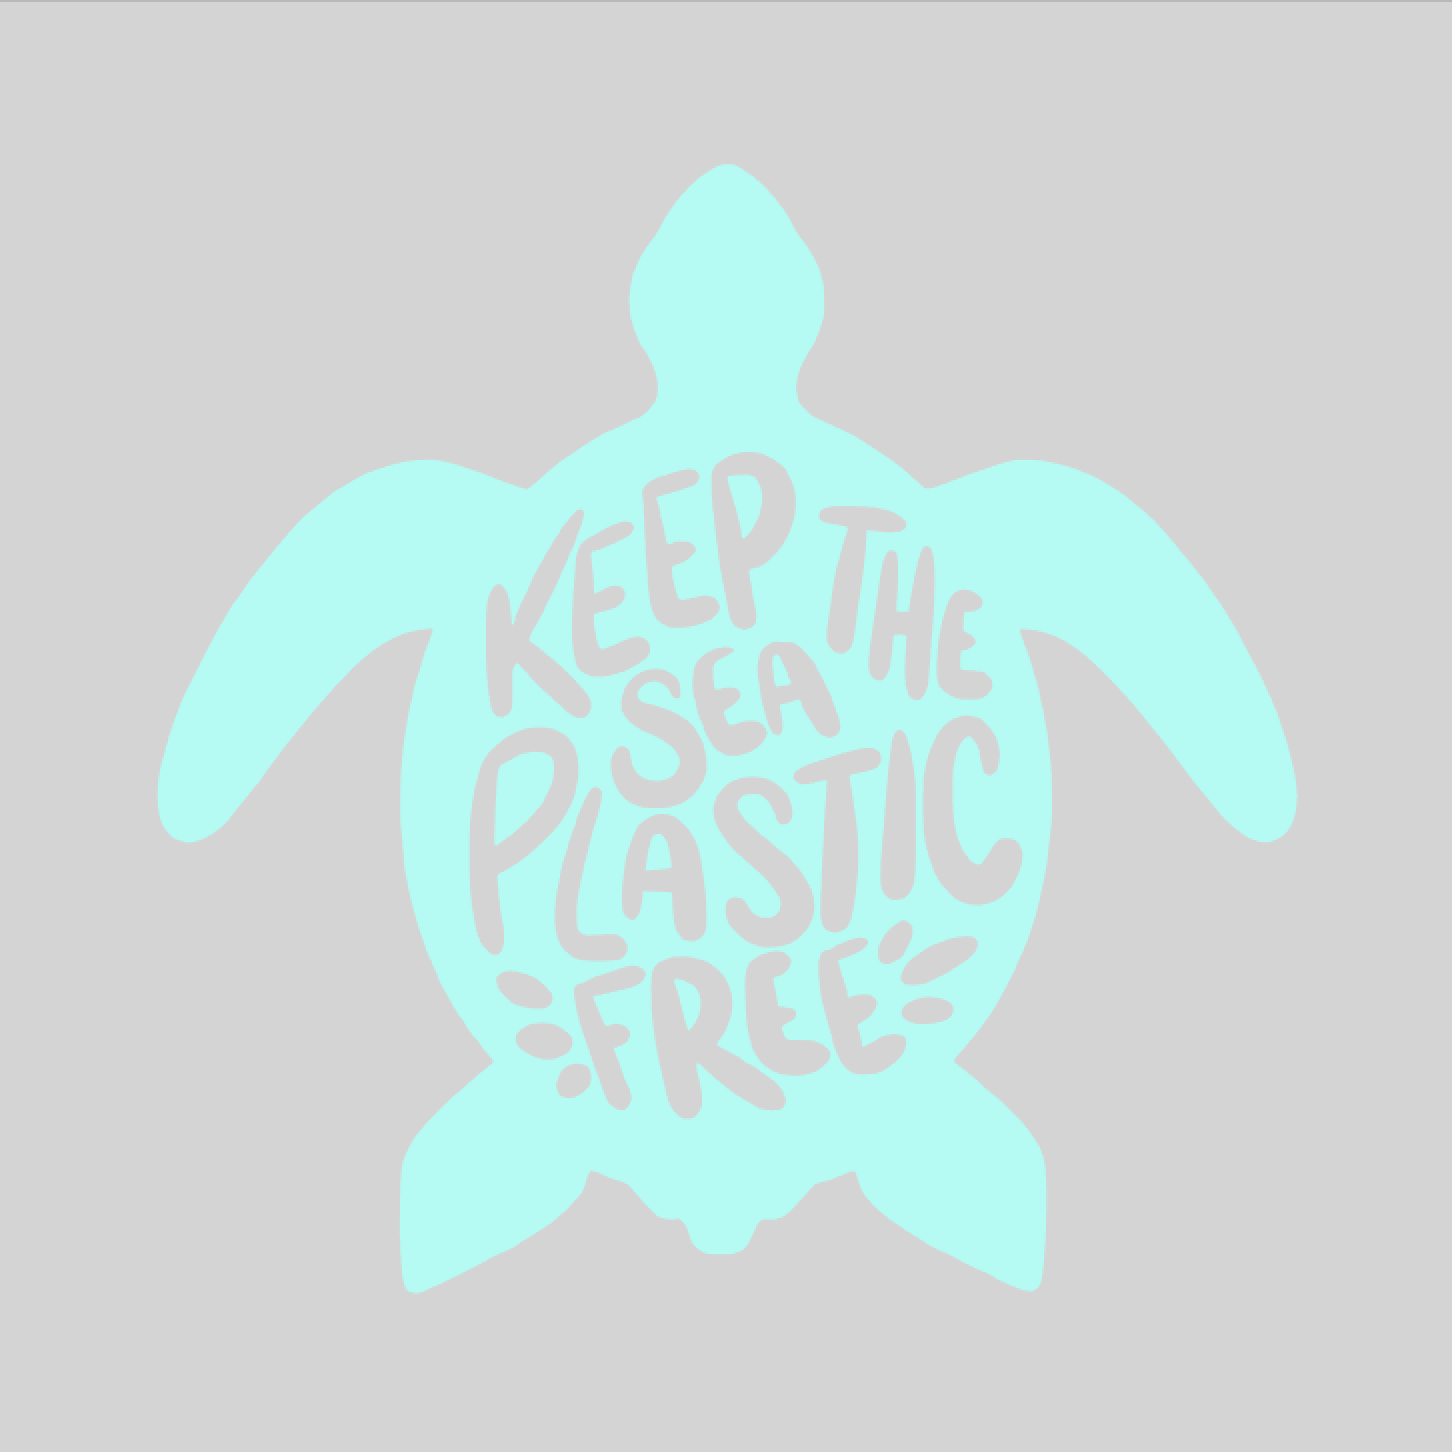 A white outline of a turtle with a text inside that says " 'Keep The Sea Plastic Free'" against a pink background